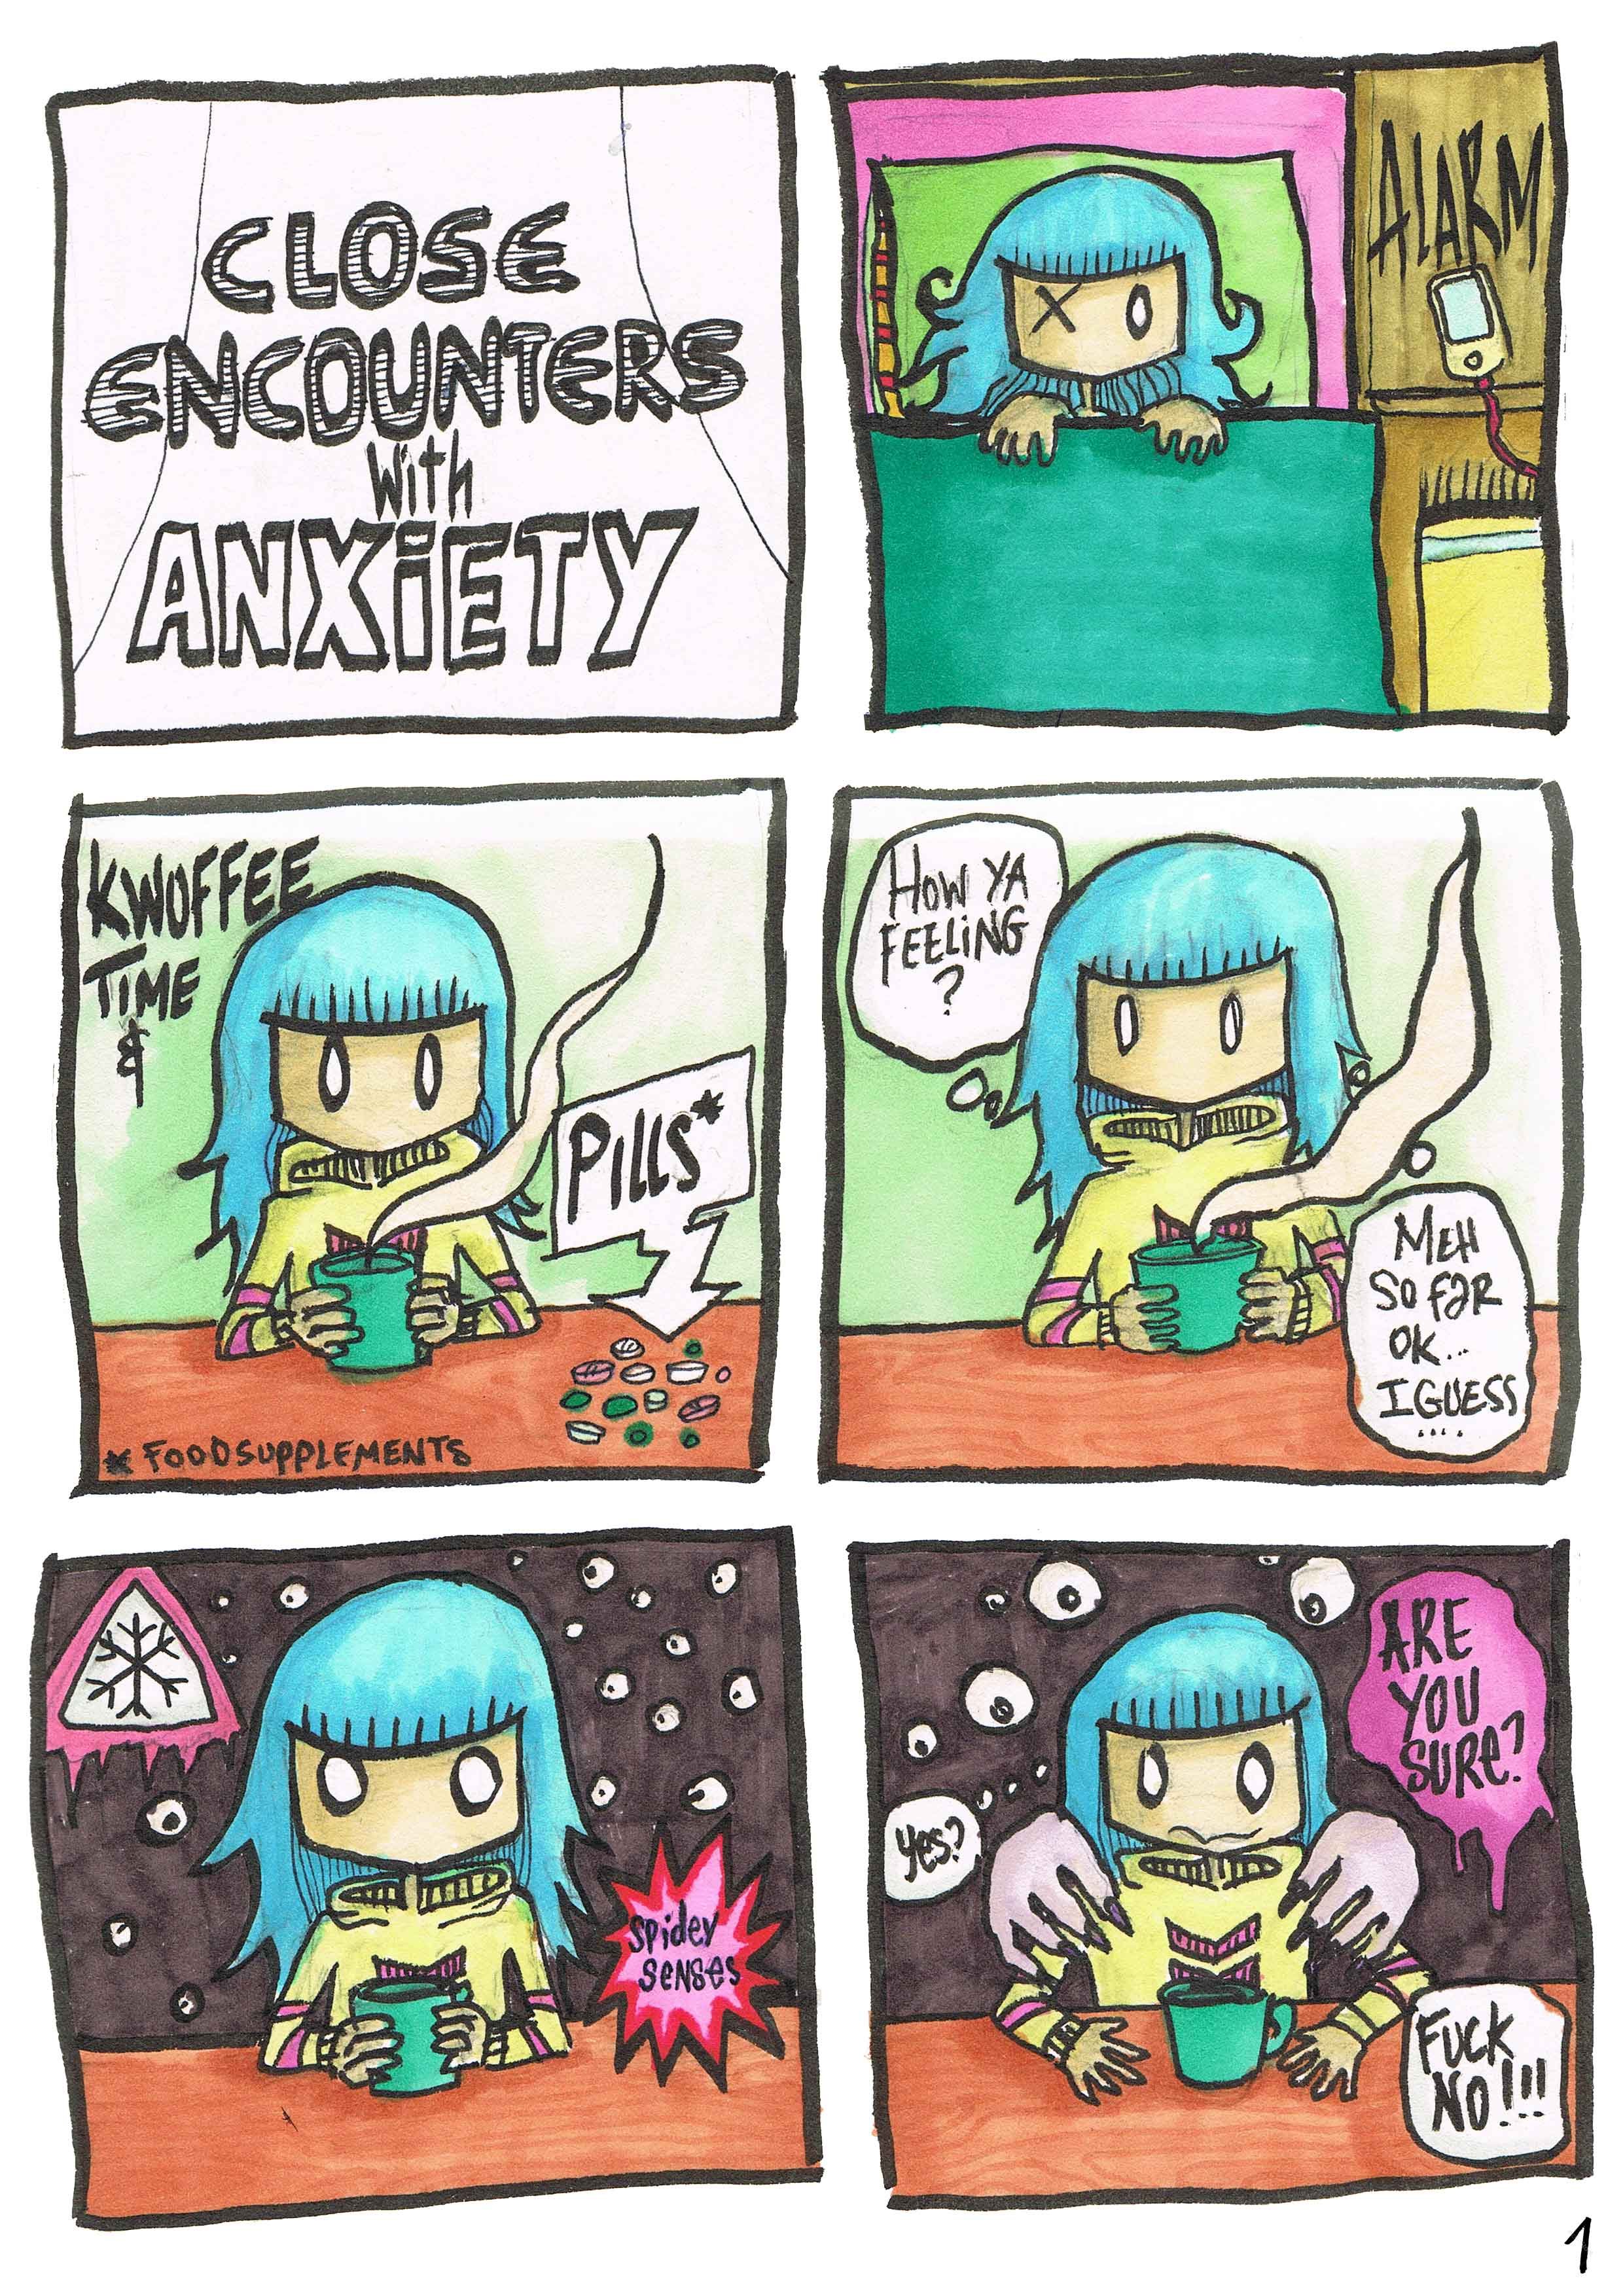 Close encounters with anxiety - P 1